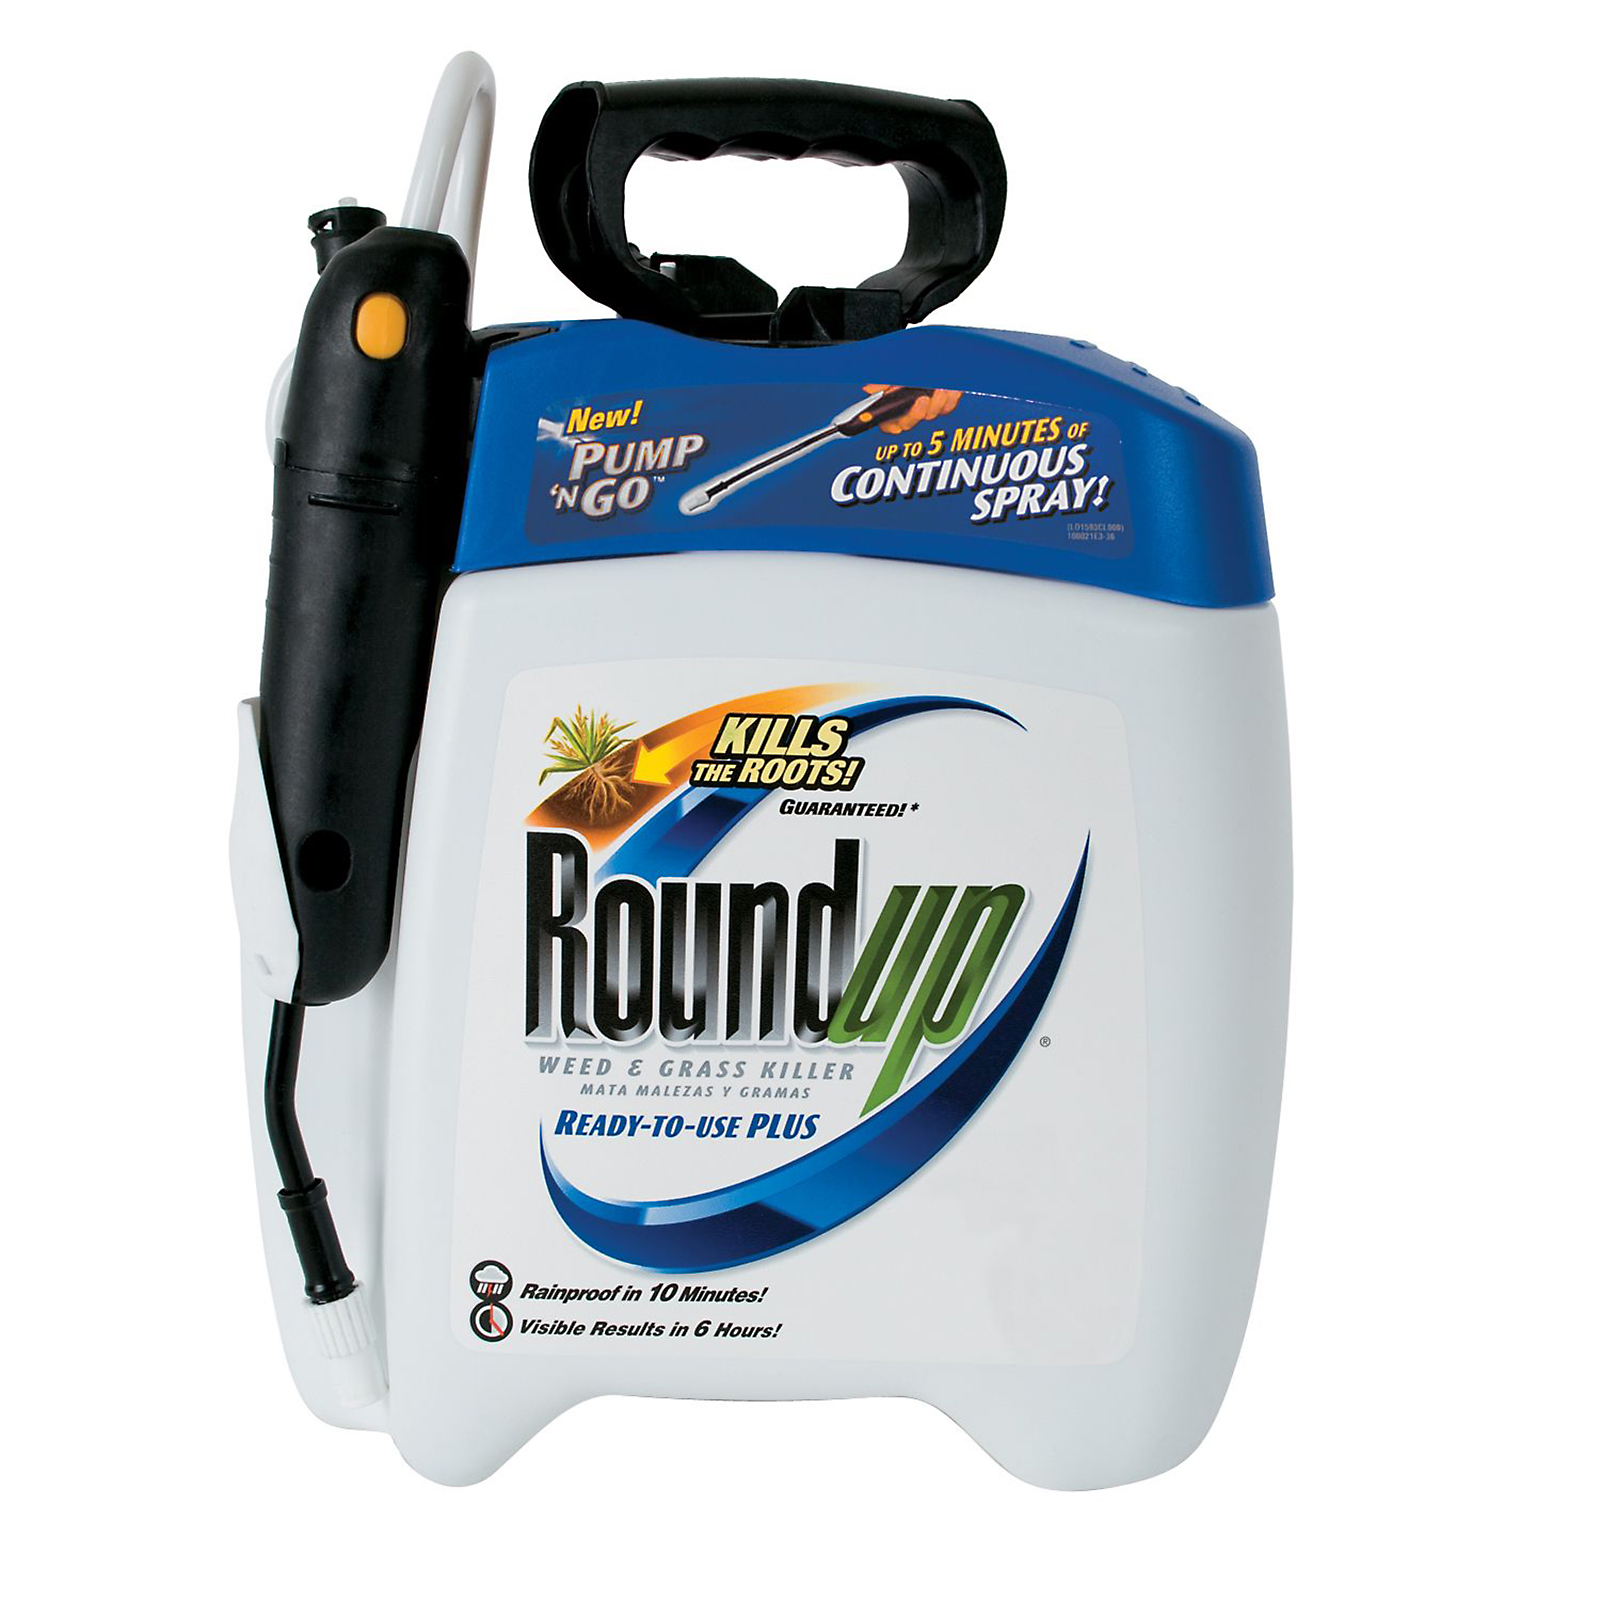 roundup-5003810-weed-and-grass-killer-pump-and-go-refill-1-25-gallon